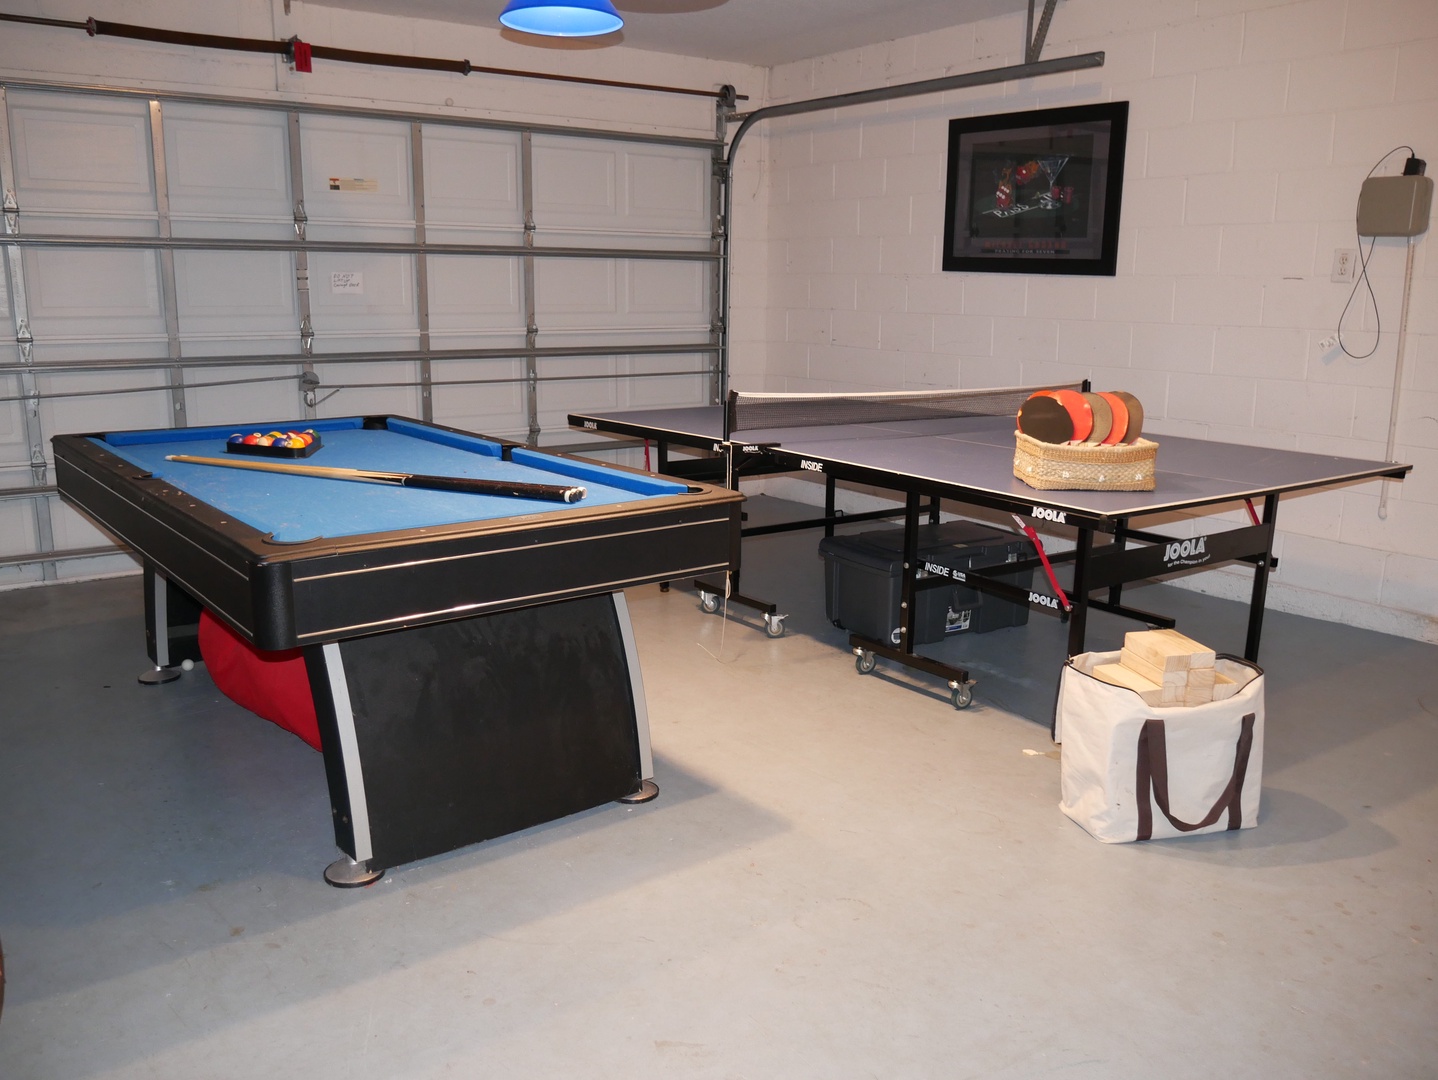 Garage converted Game Room with billiards and ping pong